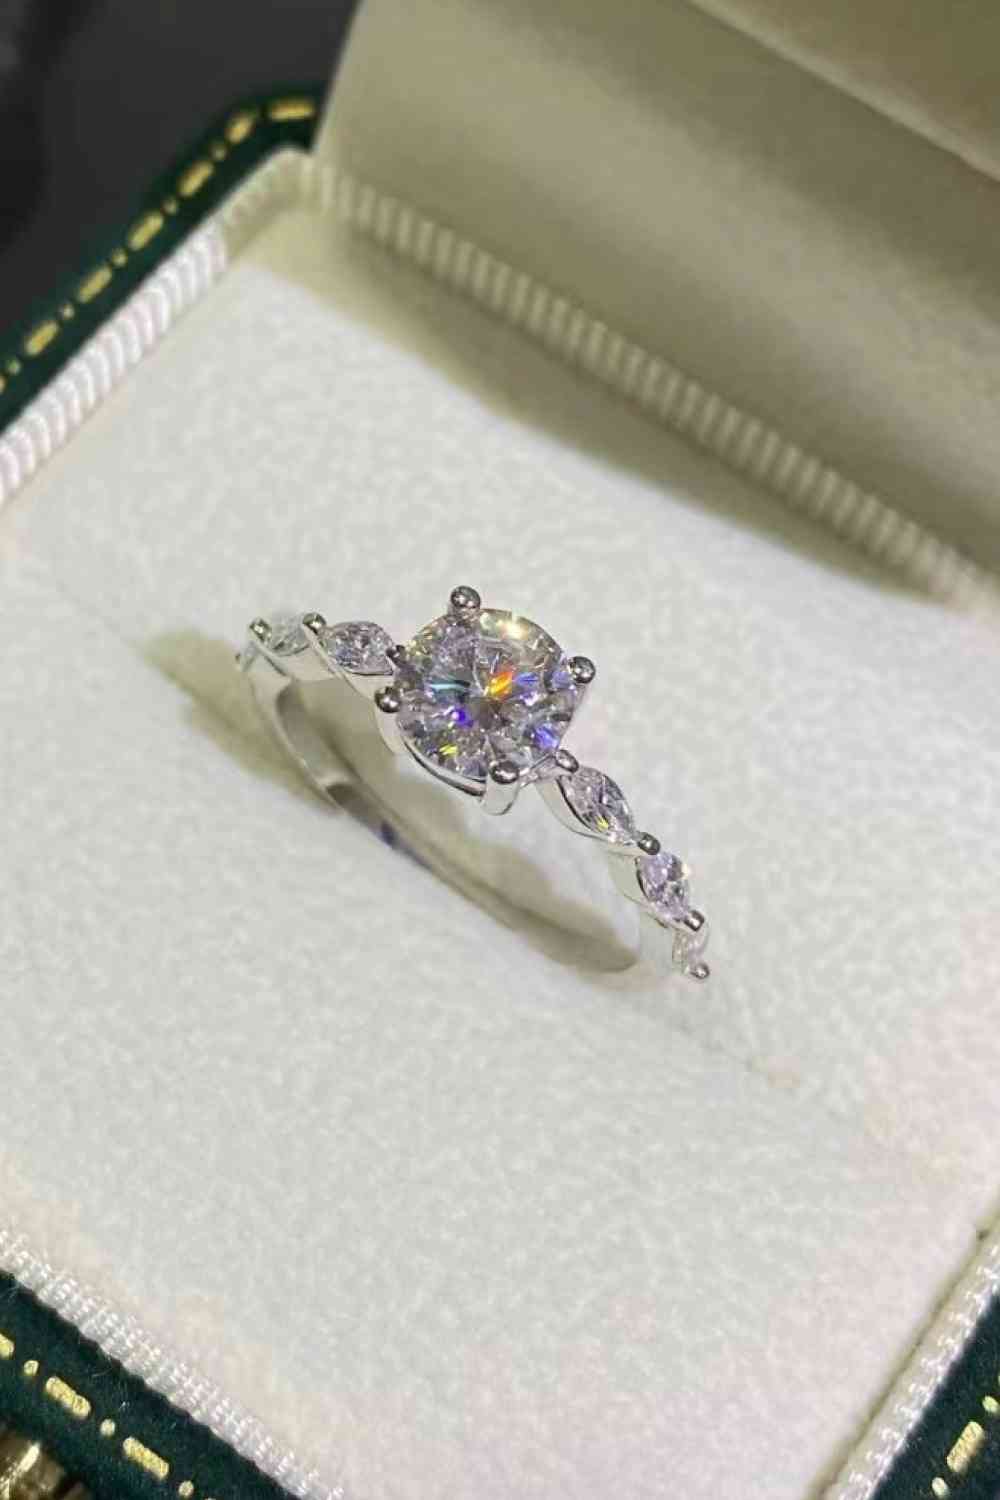 Now I See 1 Carat Moissanite Ring - lolaluxeshop